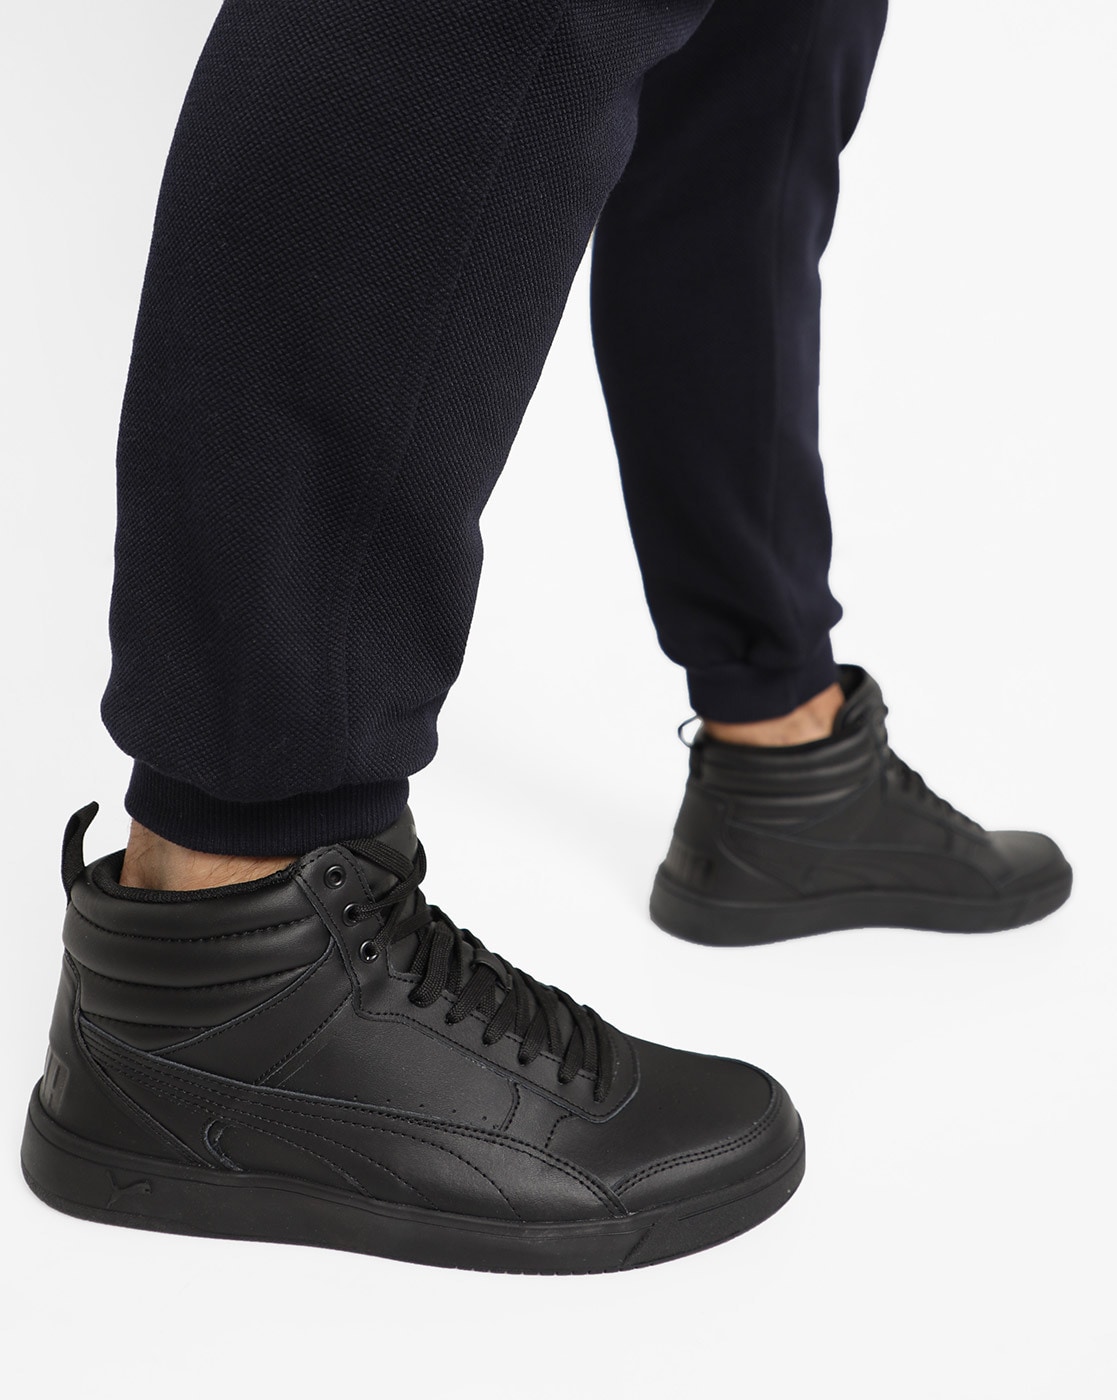 9 Must-Have All-Black Men's Sneakers